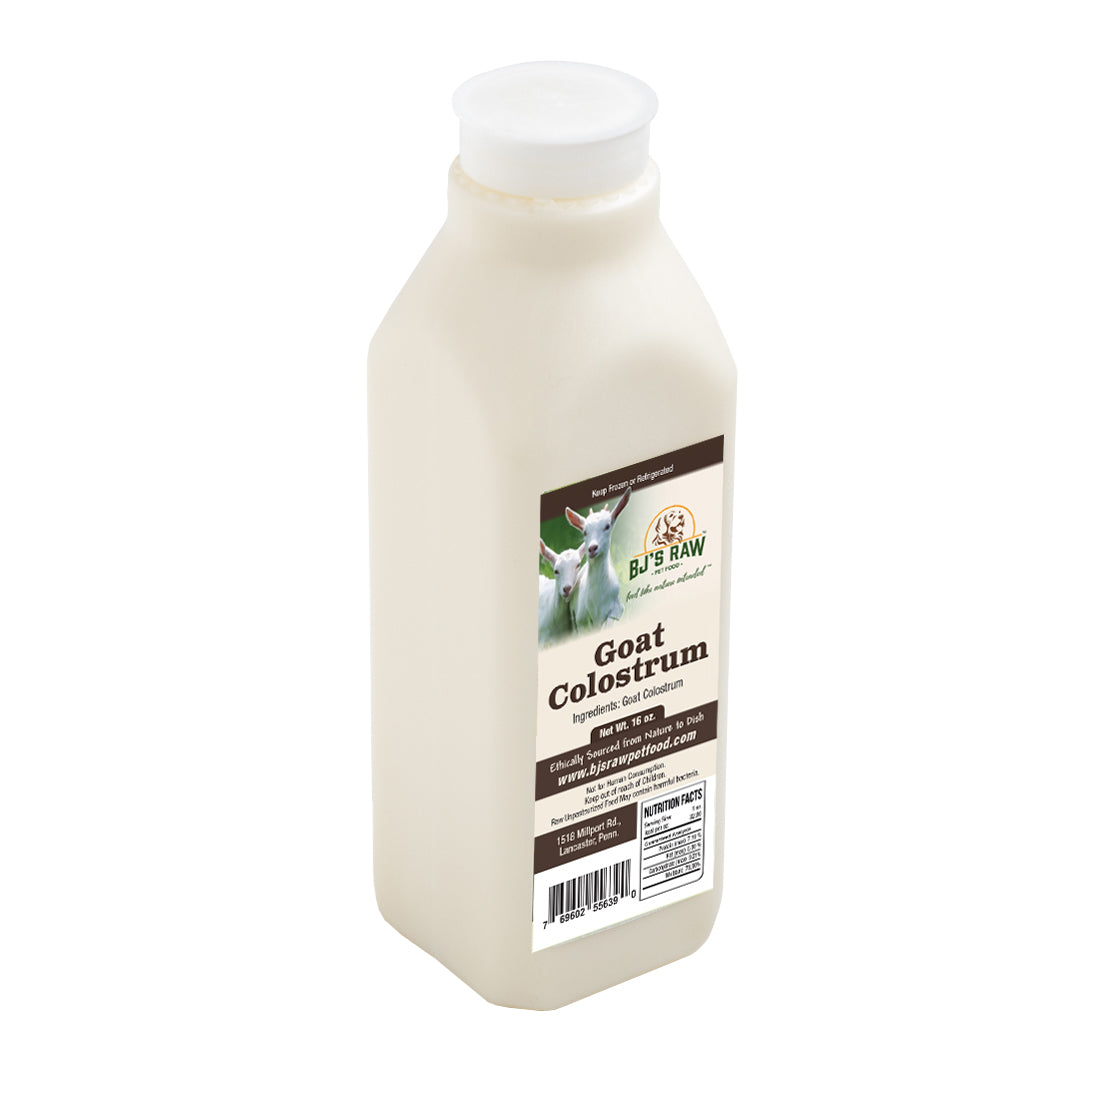 Goat Colostrum For Dogs